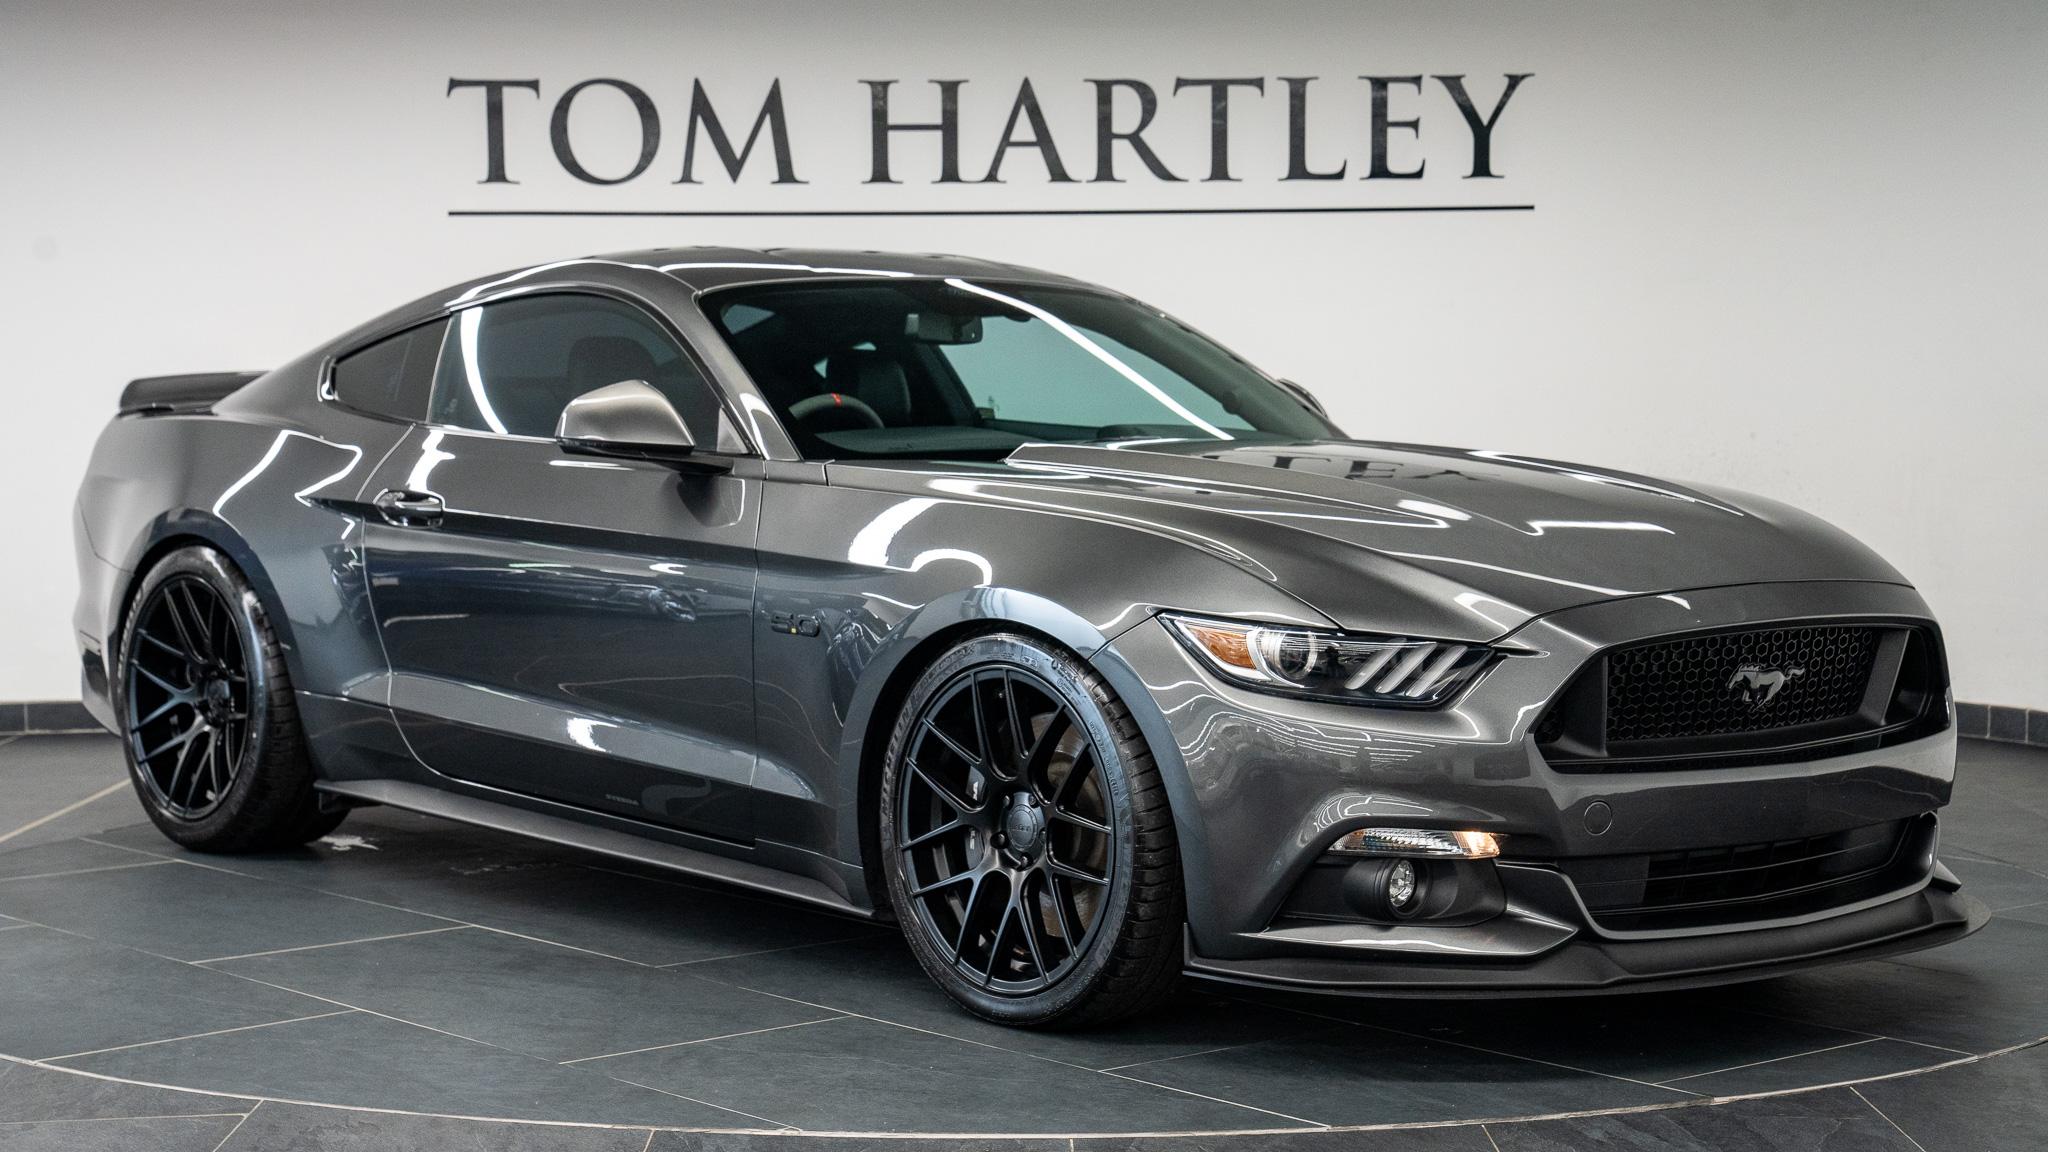 Used 2017 Ford Mustang GT Steeda Q750 StreetFighter £POA 15,000 miles  Magnetic Grey | Tom Hartley